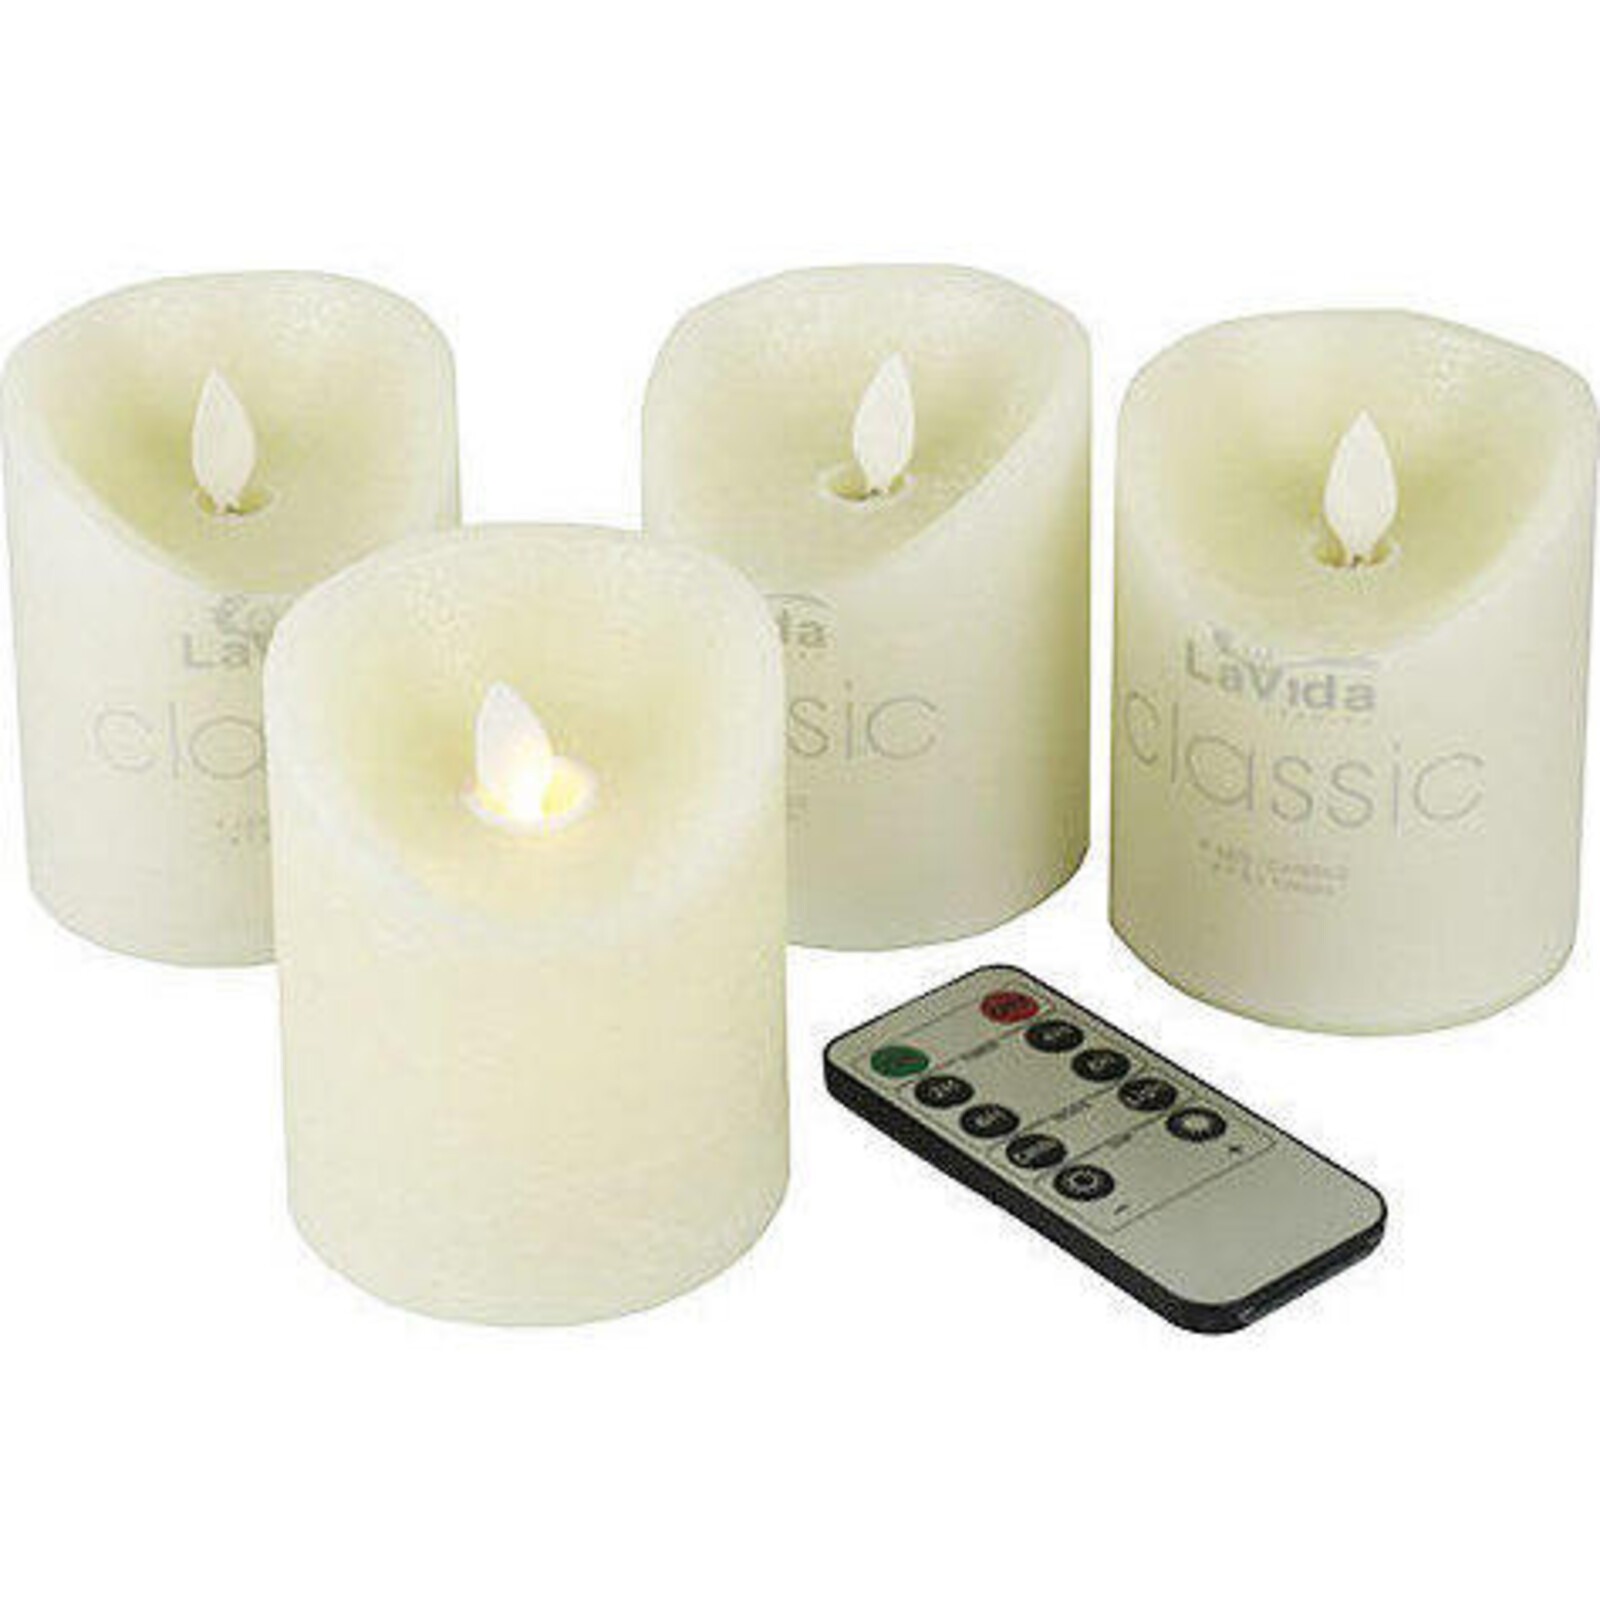 Flameless Candle Sml S/4 w/ Remote